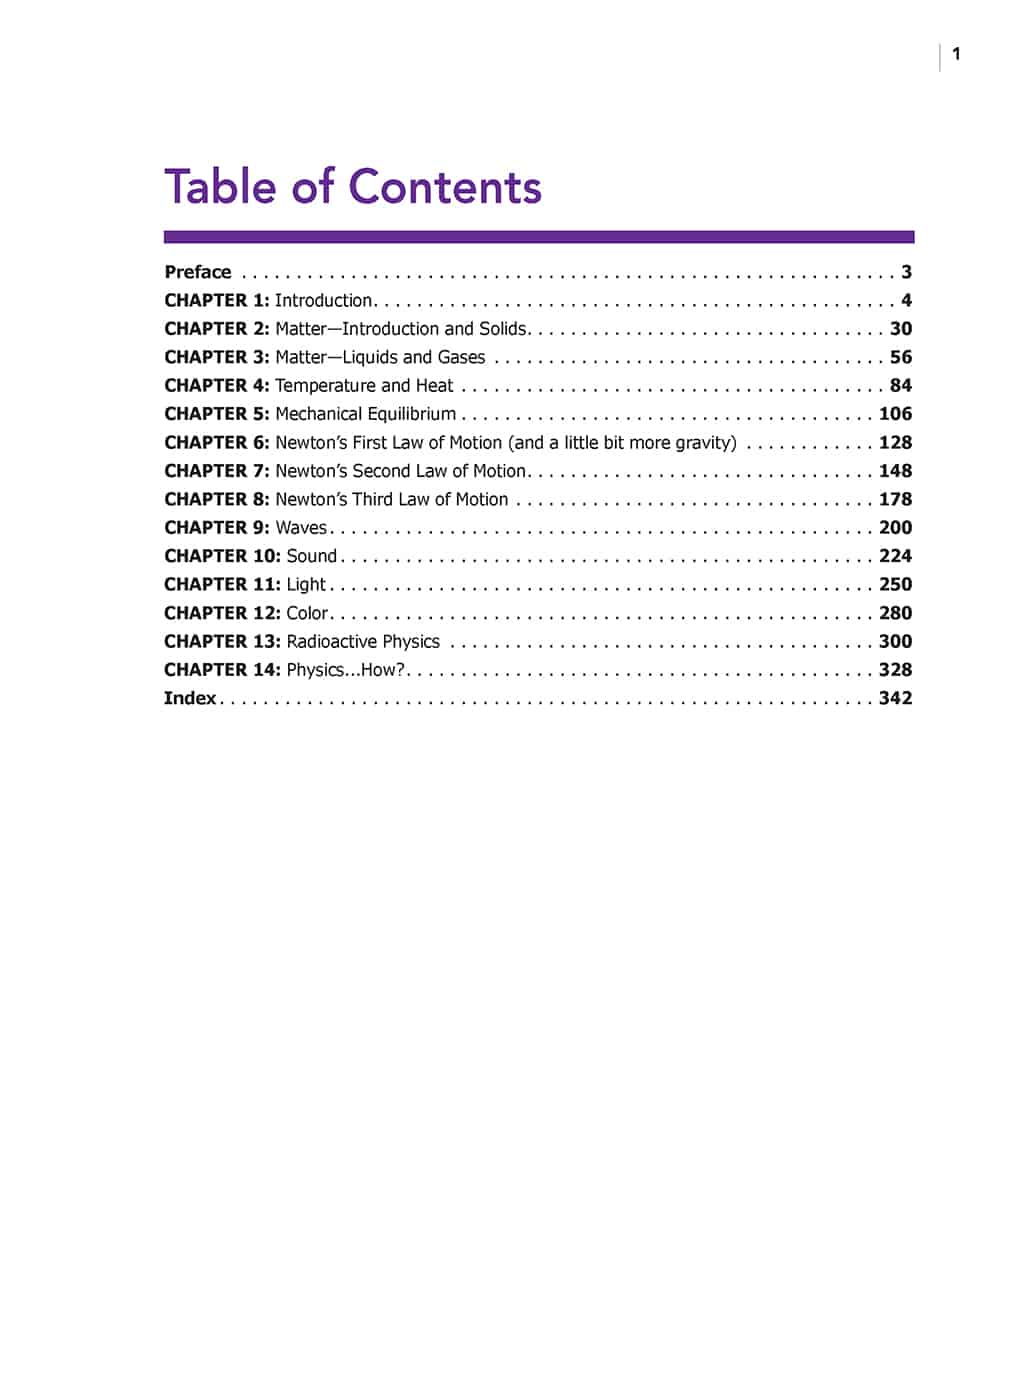 Fundamentals of Physics curriculum homeschool table of contents